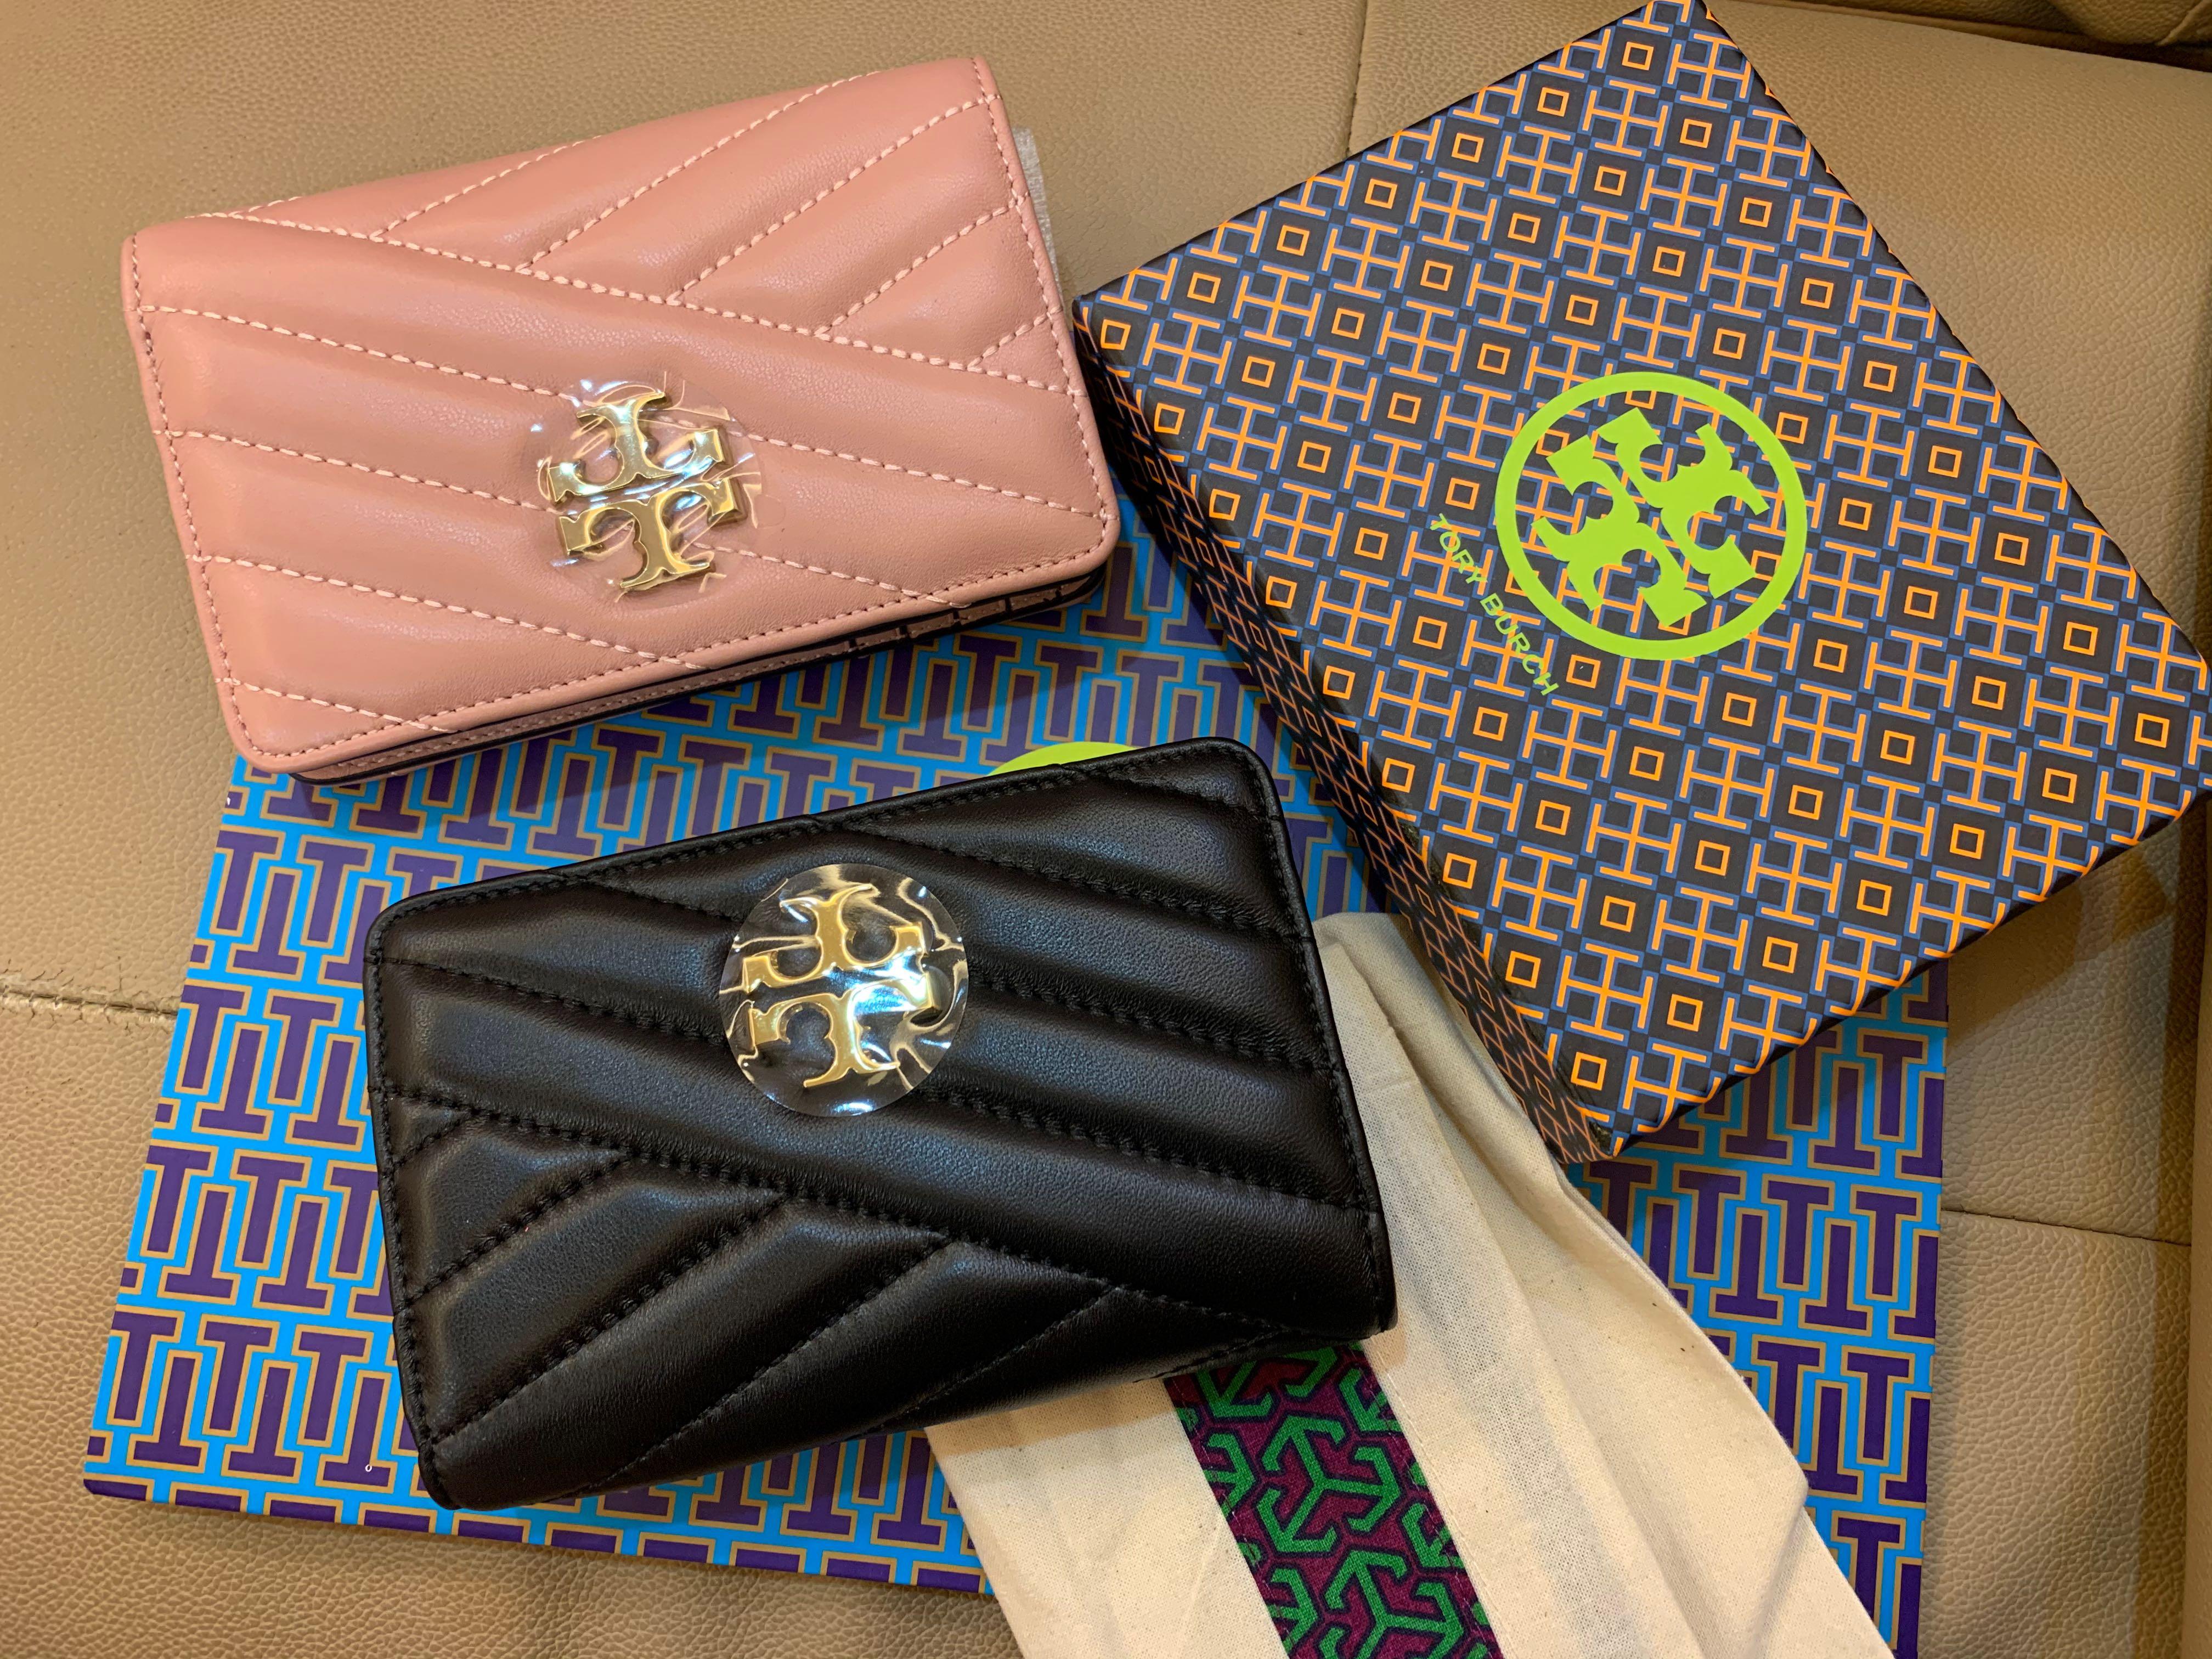 Authentic Tory Burch Kira chevron medium slim wallet purse pink and black,  Women's Fashion, Bags & Wallets, Purses & Pouches on Carousell